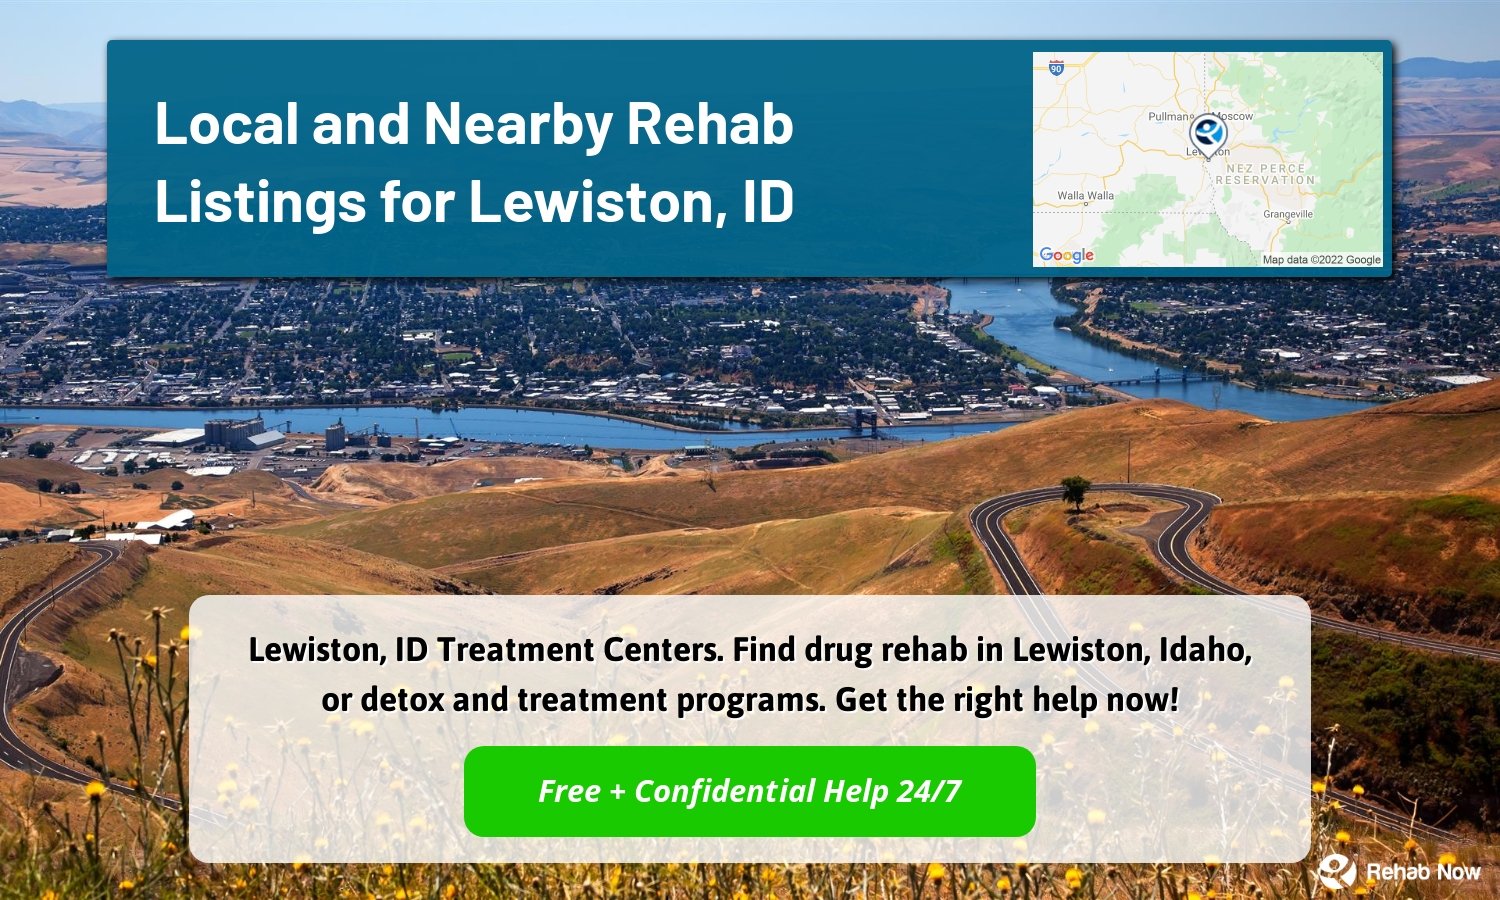 Lewiston, ID Treatment Centers. Find drug rehab in Lewiston, Idaho, or detox and treatment programs. Get the right help now!